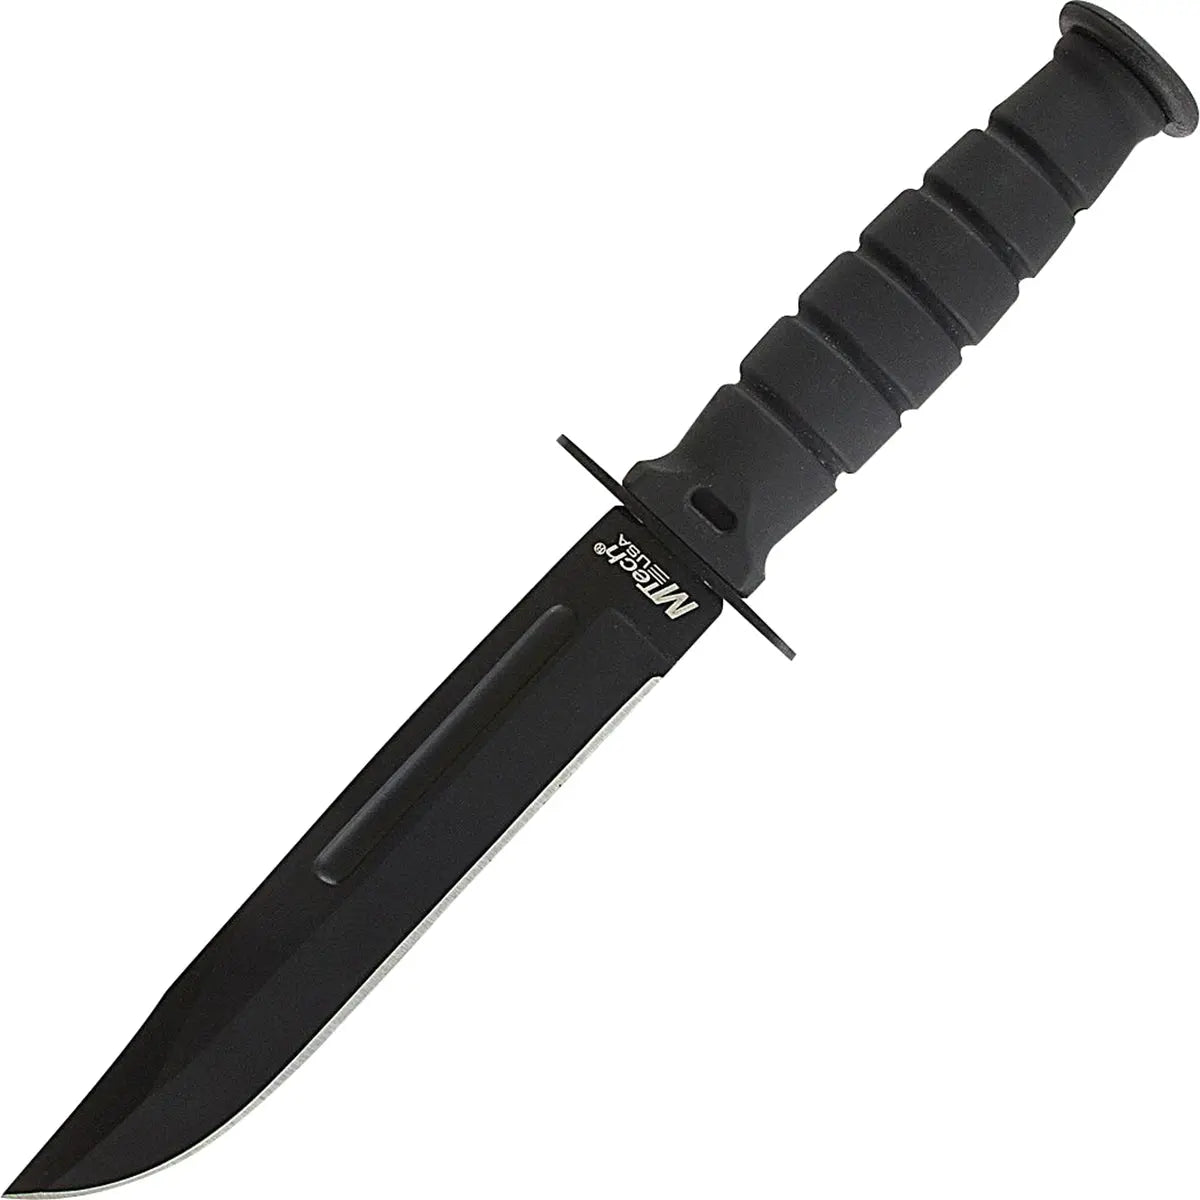 MTech USA Tactical Kabai Fixed Blade Bowie Boot Knife, 6" Overall Black MT-632DB M-Tech